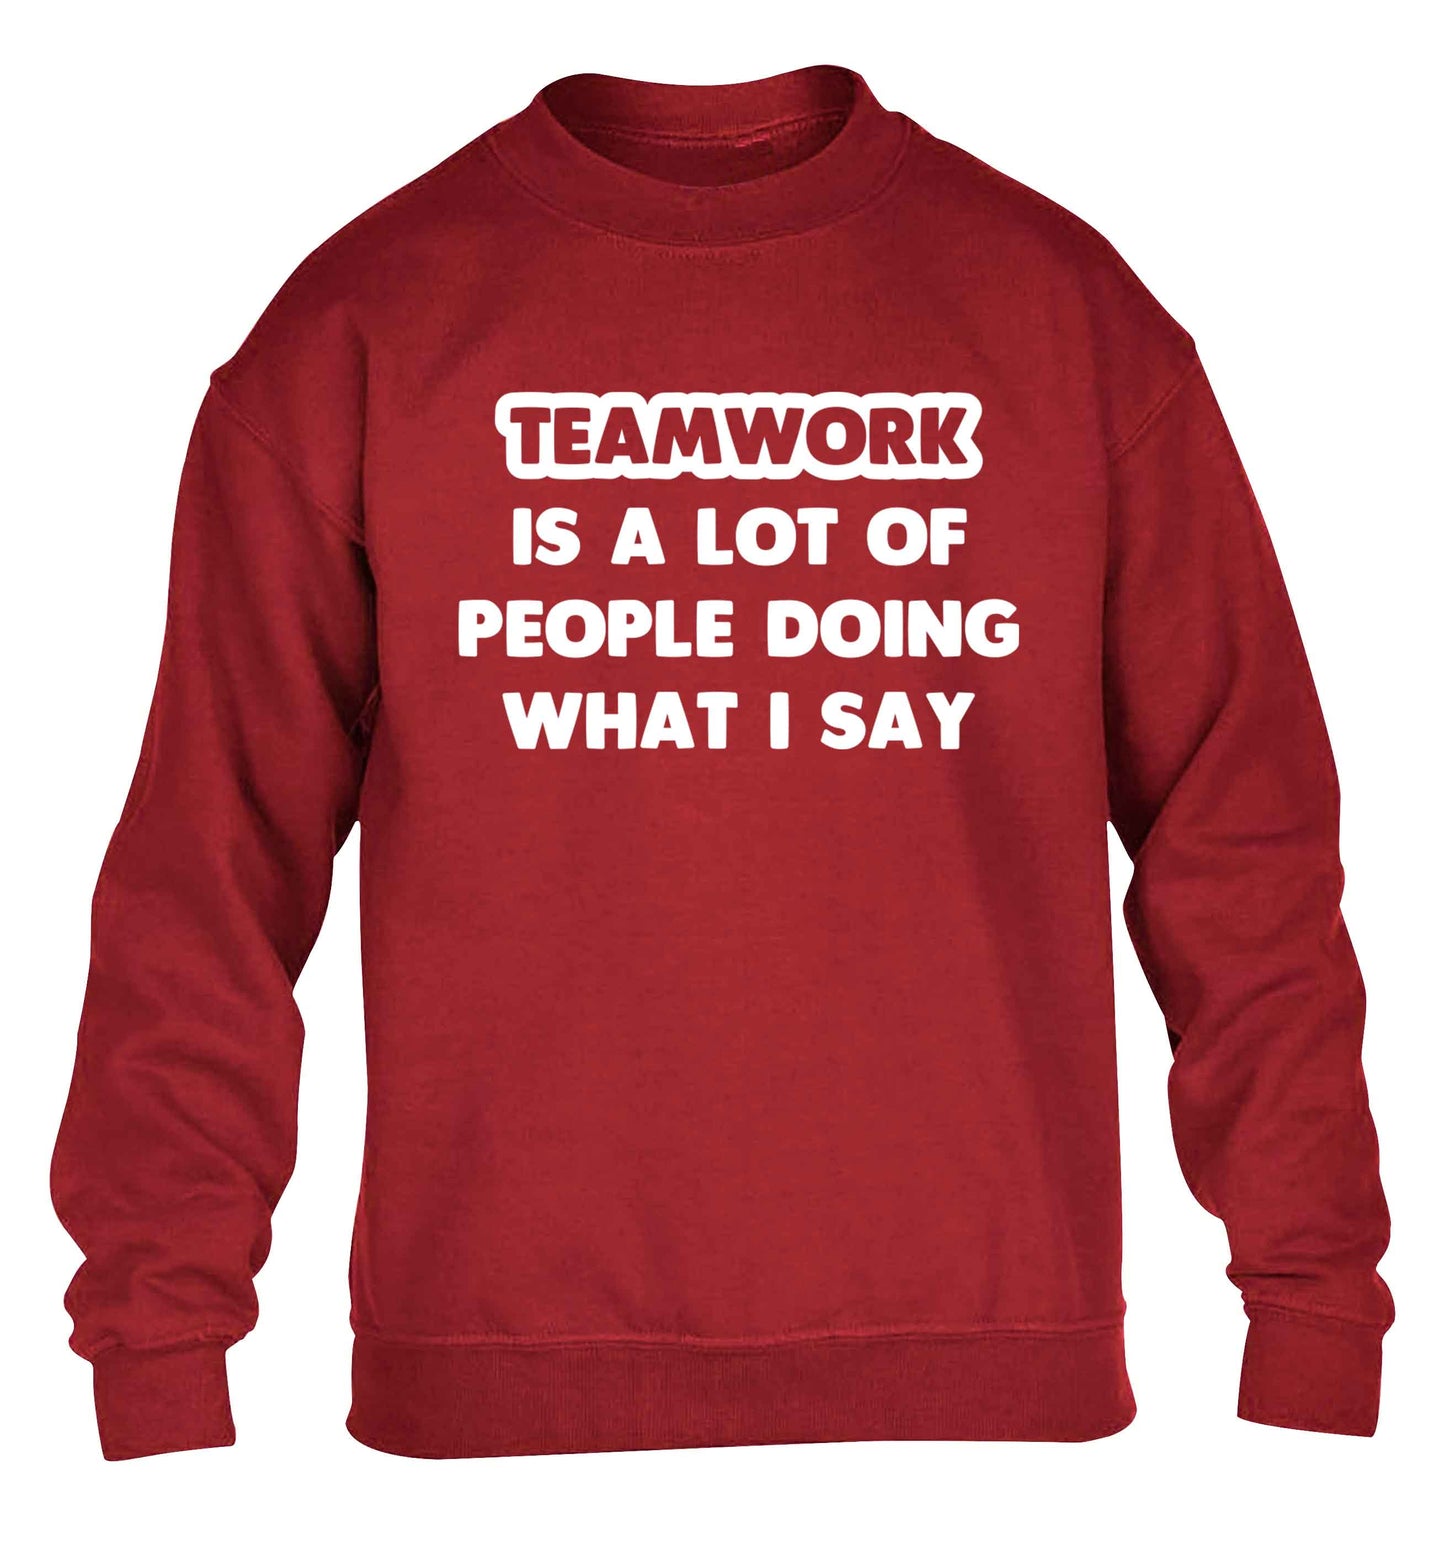 Teamwork is a lot of people doing what I say children's grey sweater 12-13 Years